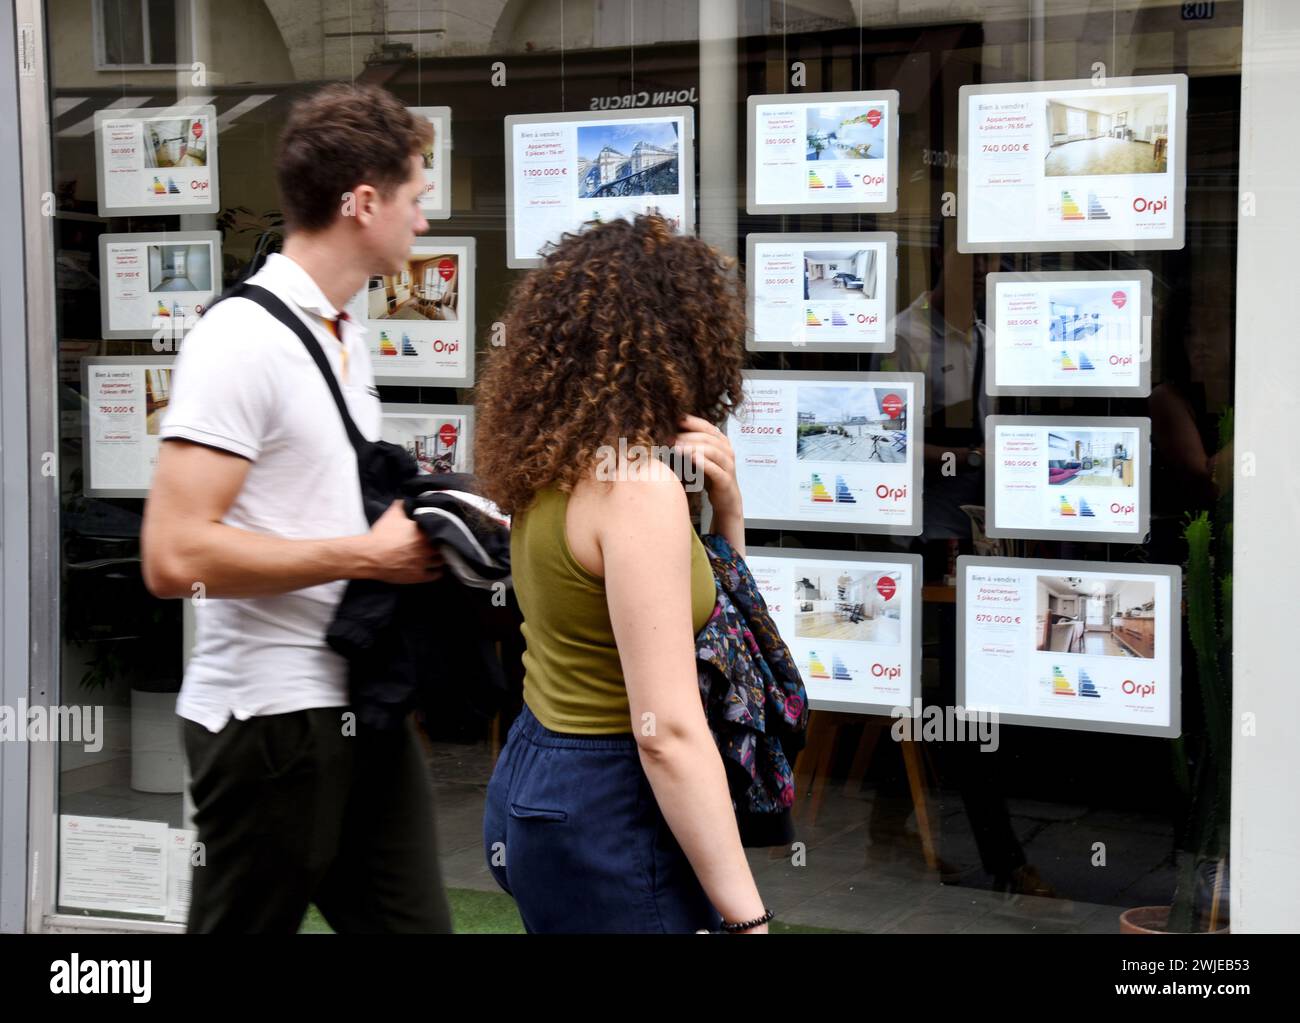 Estate agency in Paris (France). Couple looking at the classified advertisements through the window Stock Photo